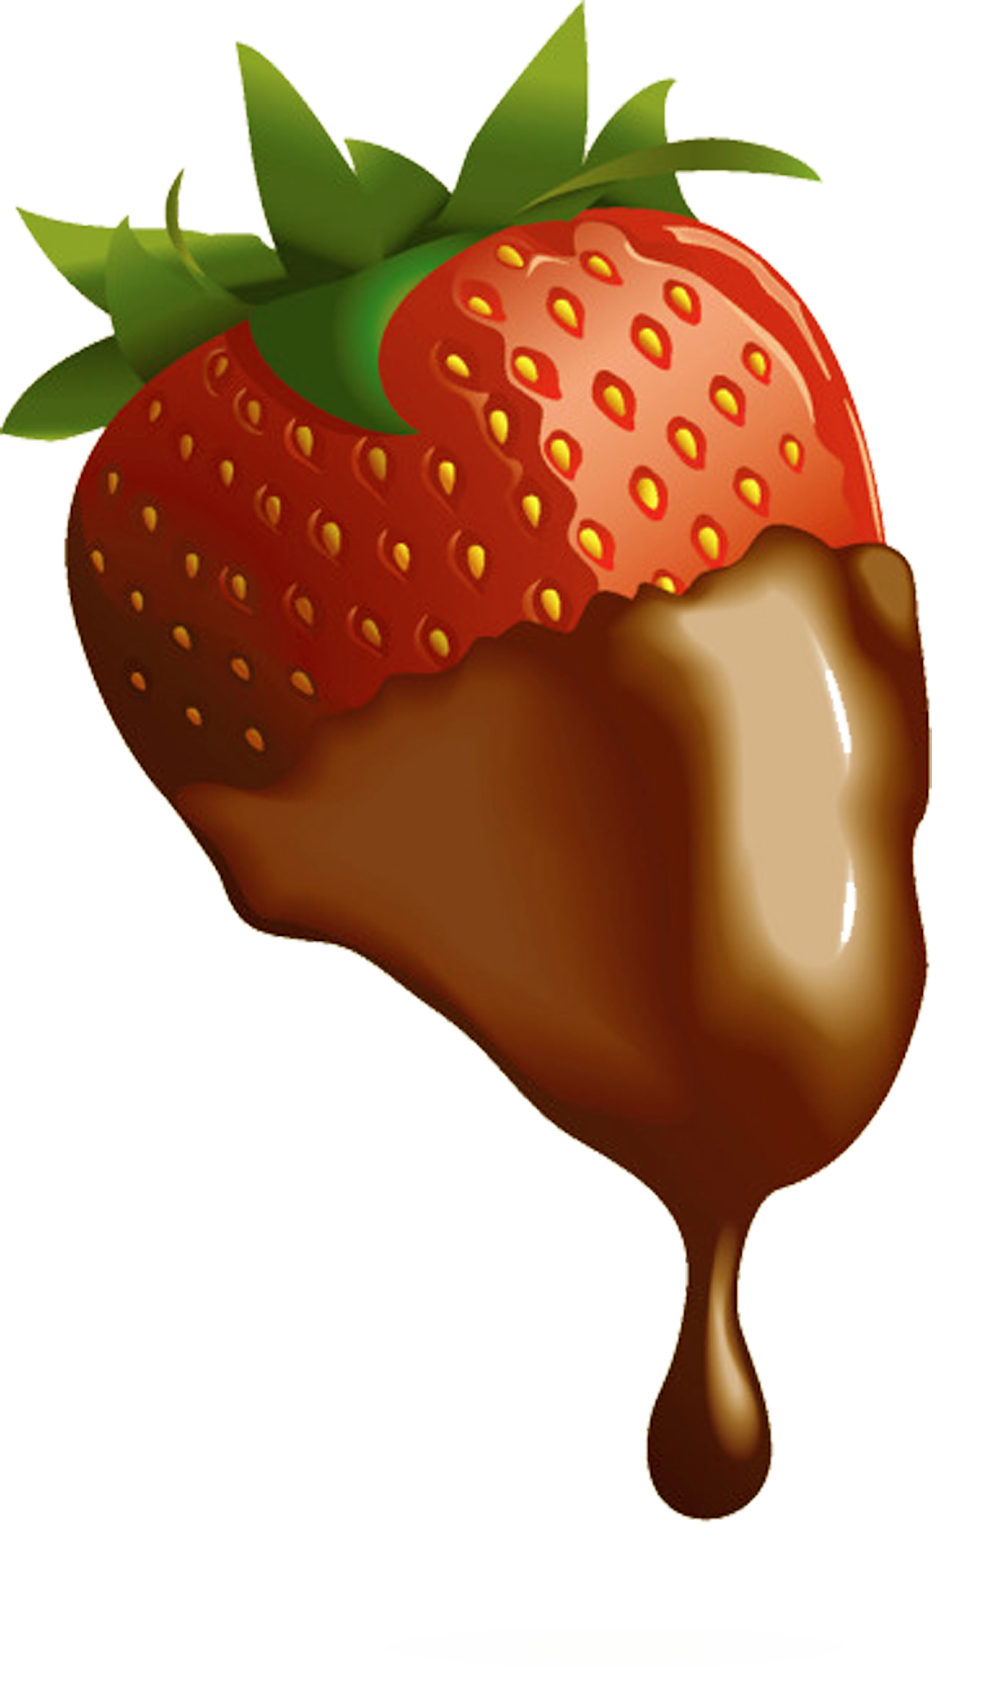 food clipart strawberry